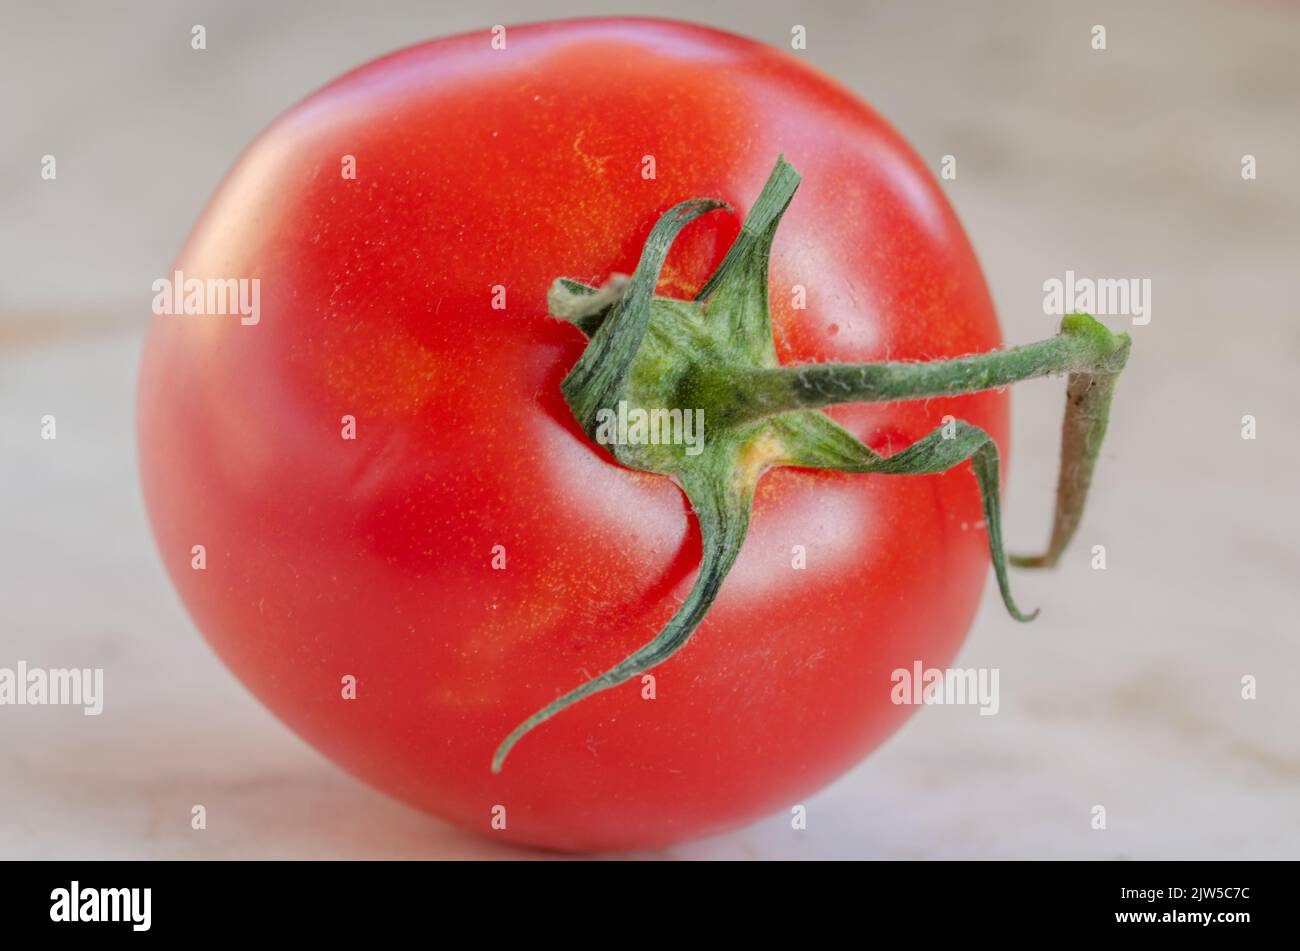 A tomato that are nice and big Stock Photo